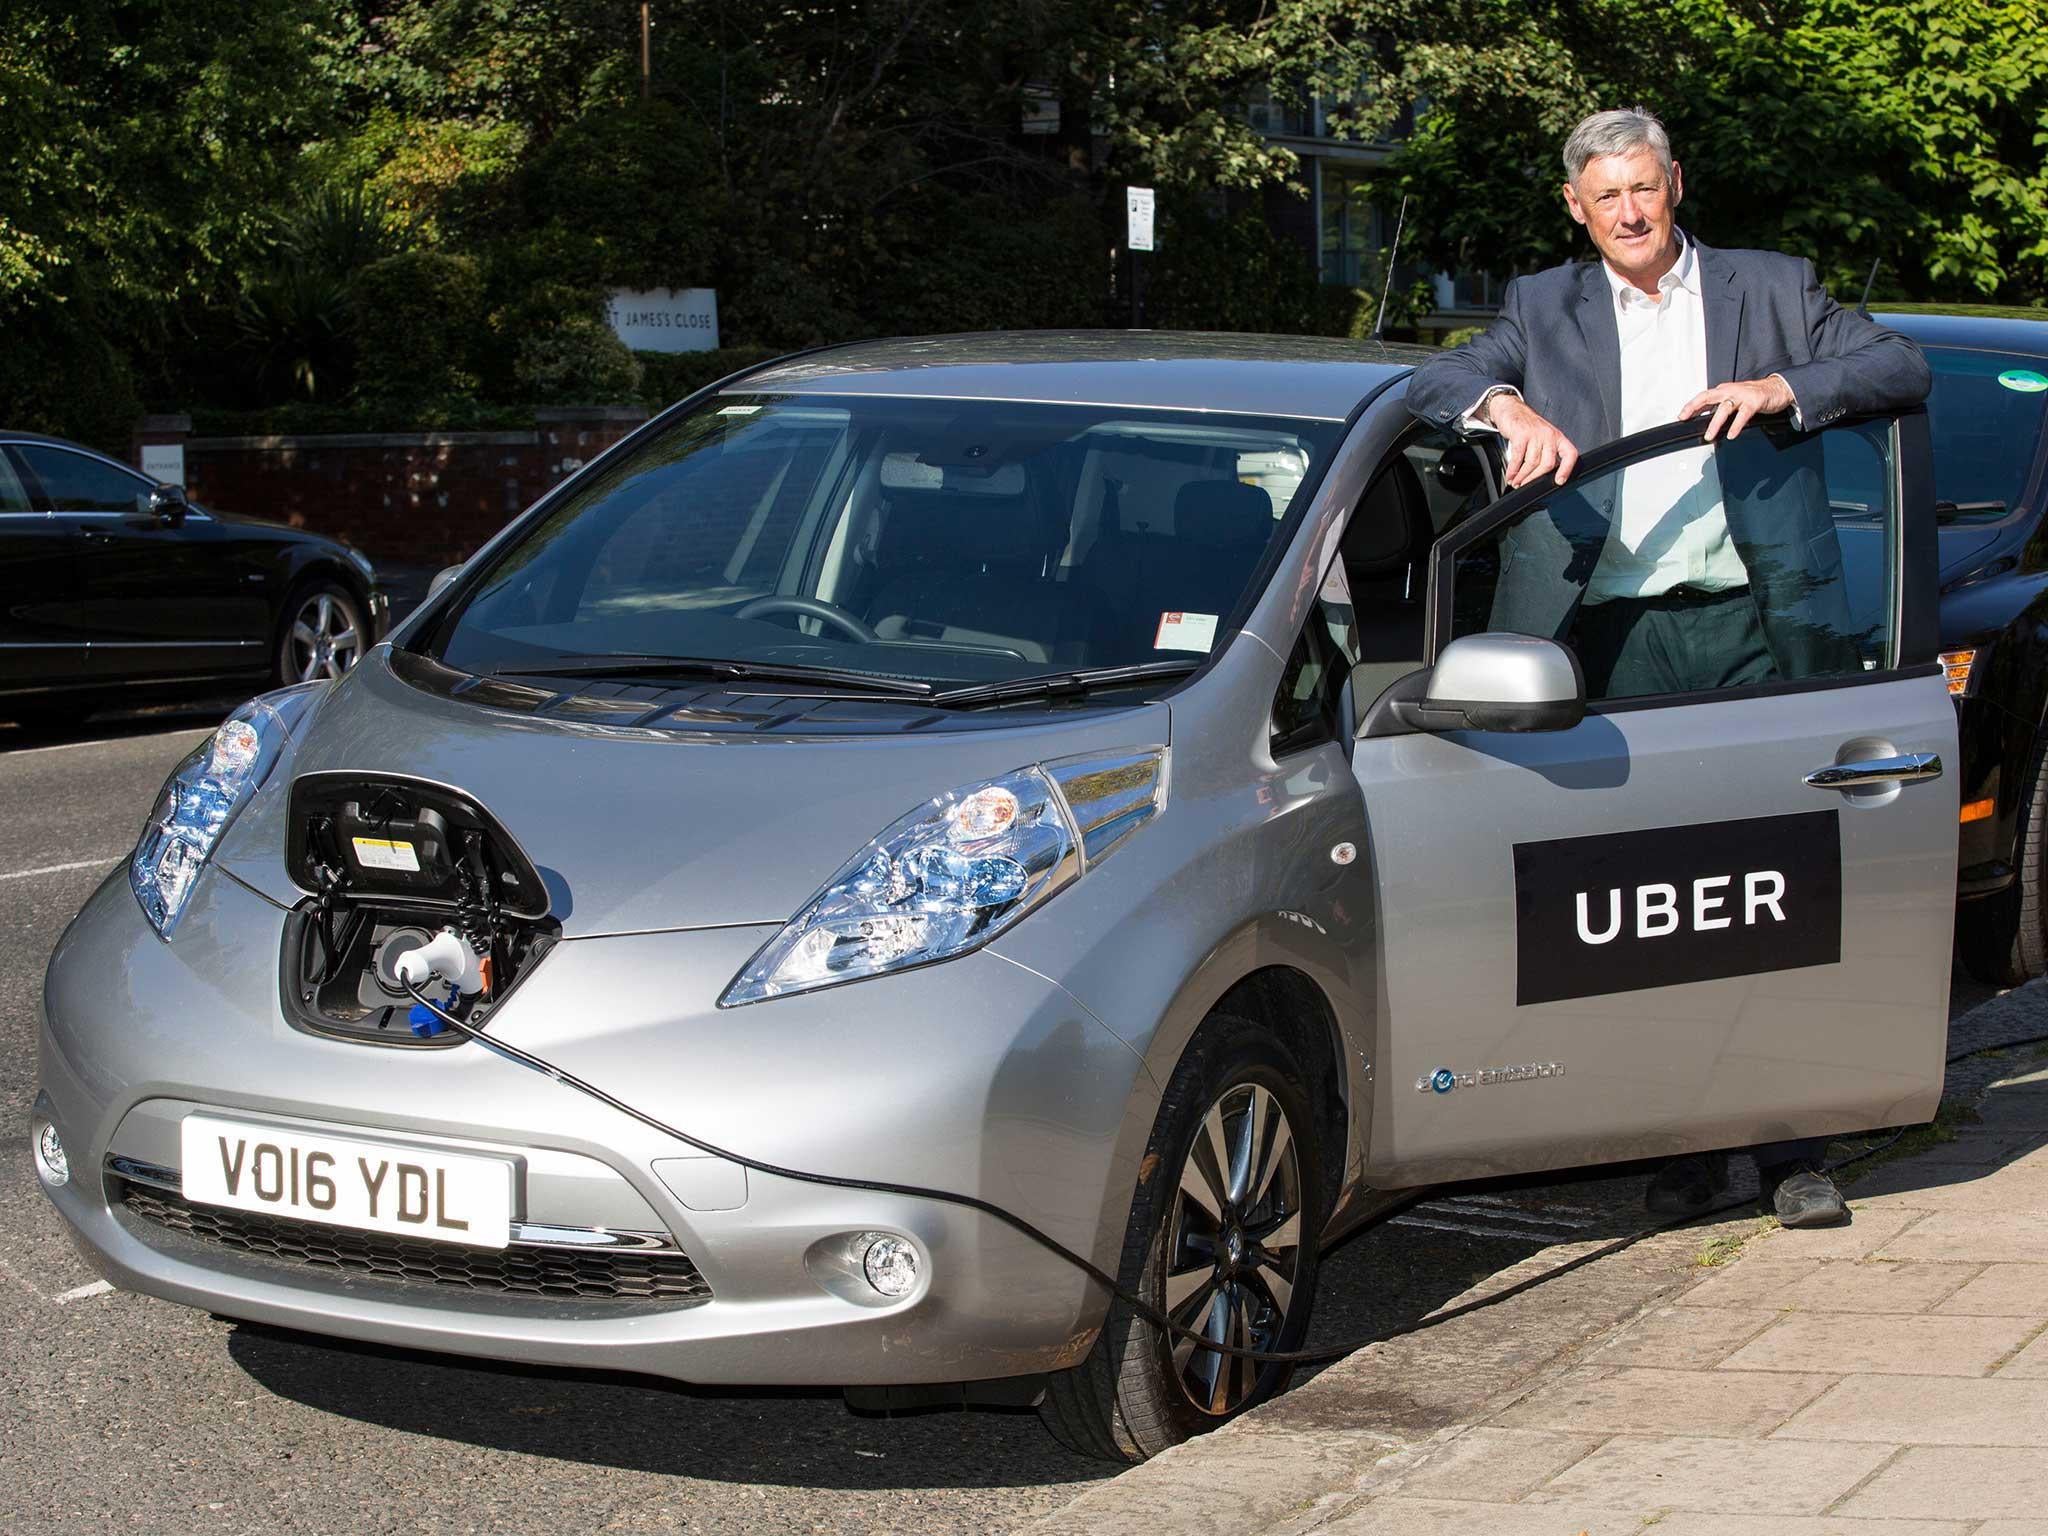 Karl Anders, National Electric Vehicle Fleet Manager of Nissan at the launch of the first Uber electric cars in London